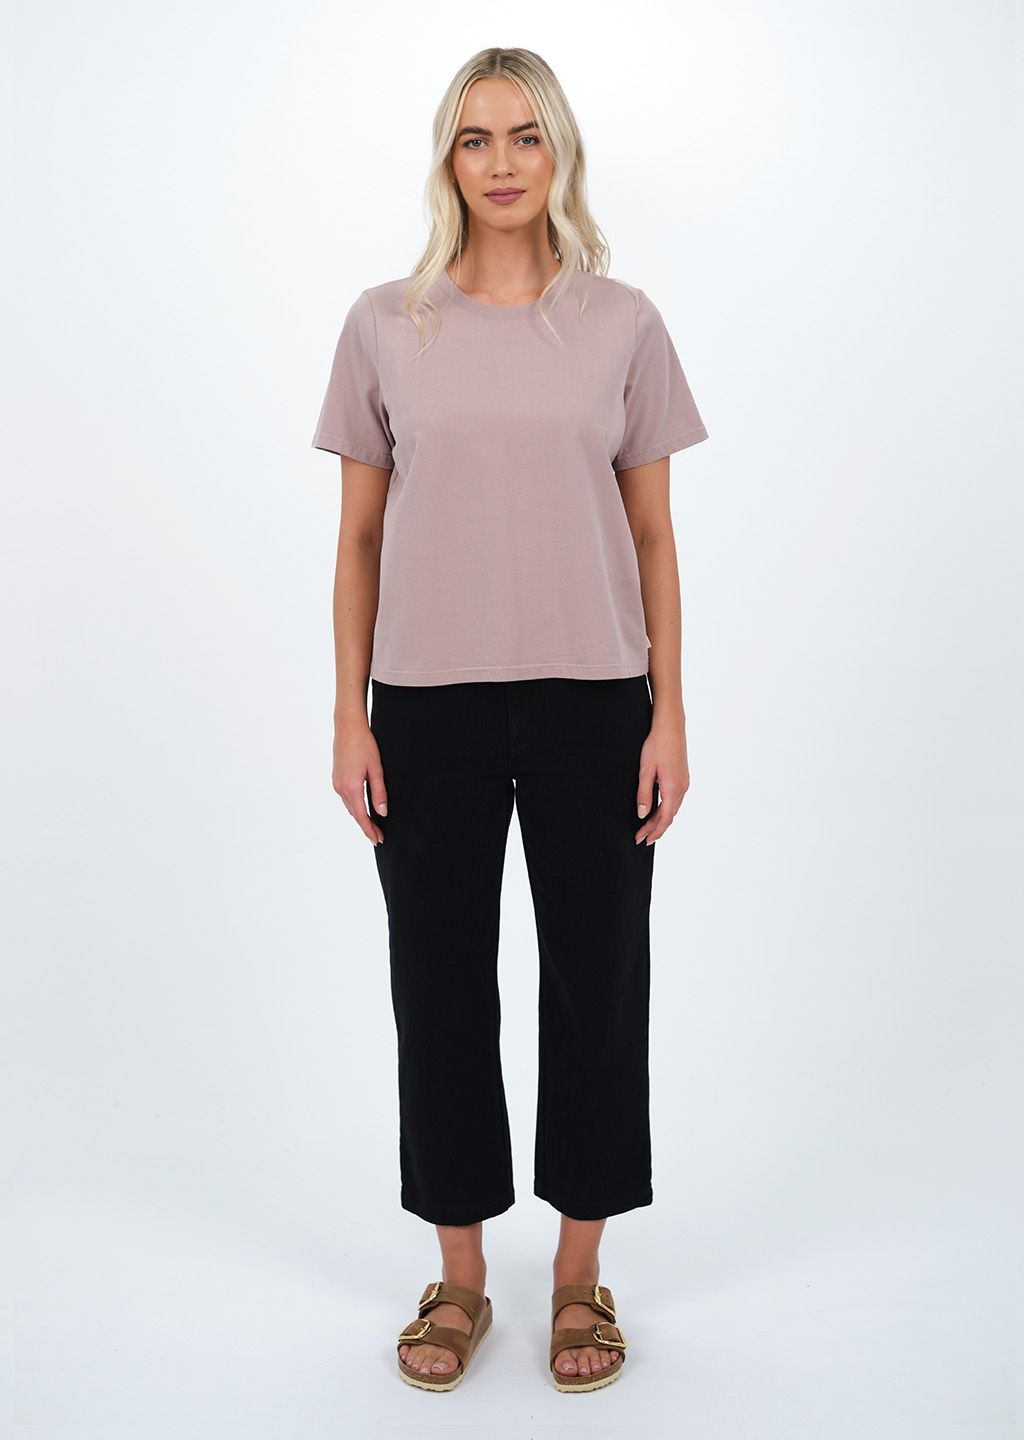 Titchie - Relaxo Tee, Taupe